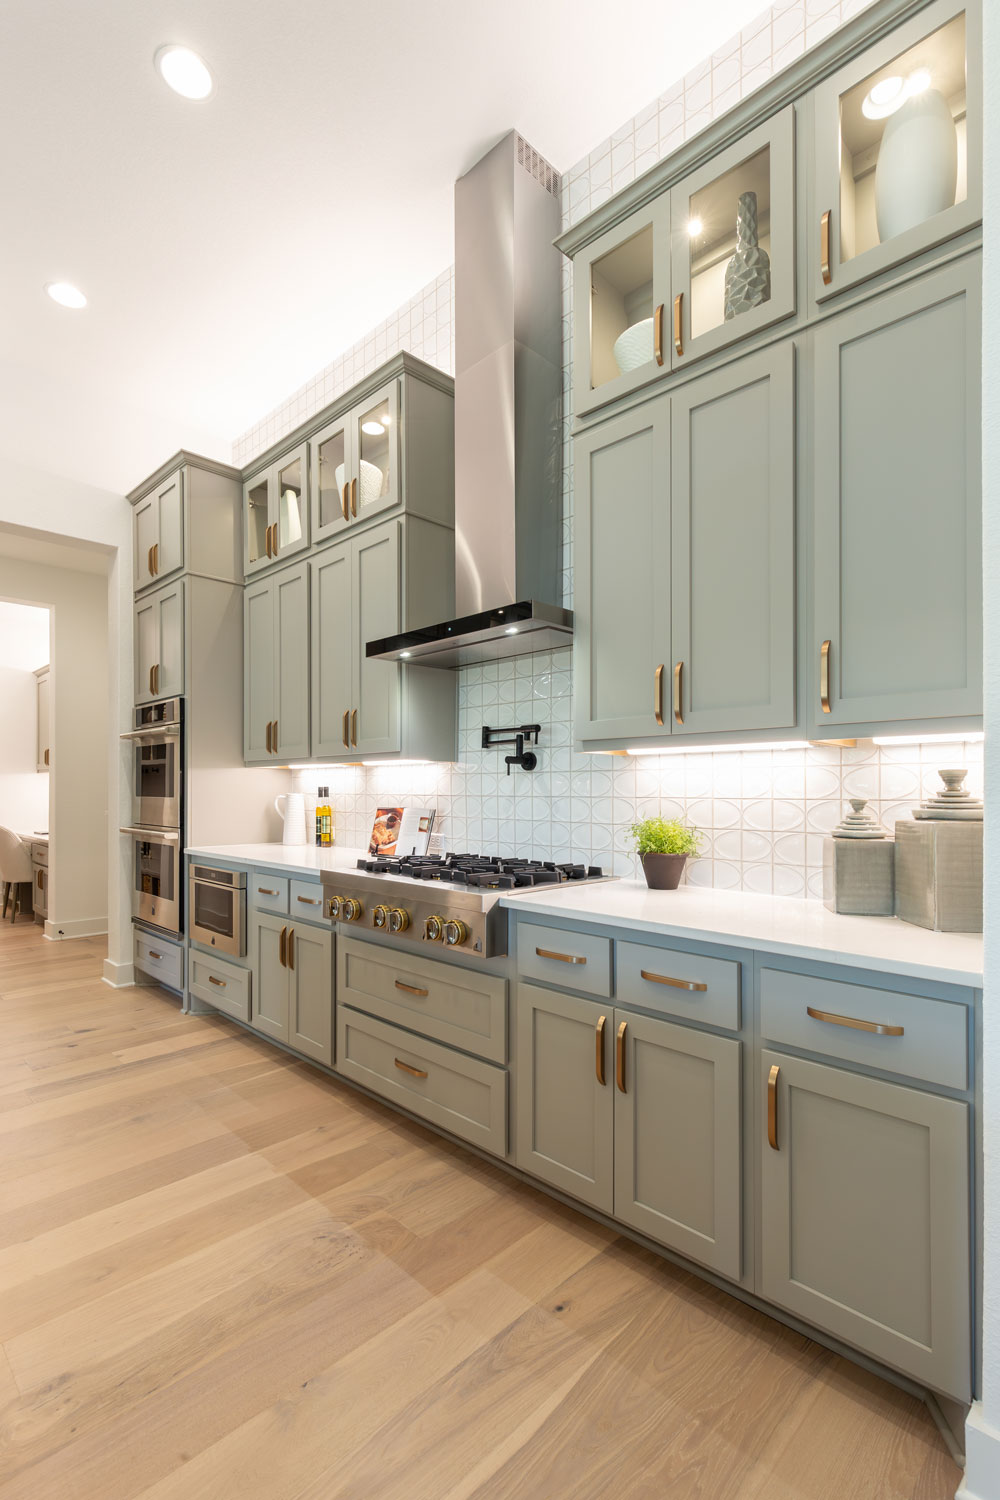 Kitchen with gray-green painted cabinets and Shaker style cabinet doors with OE4, IE2, and flat panel